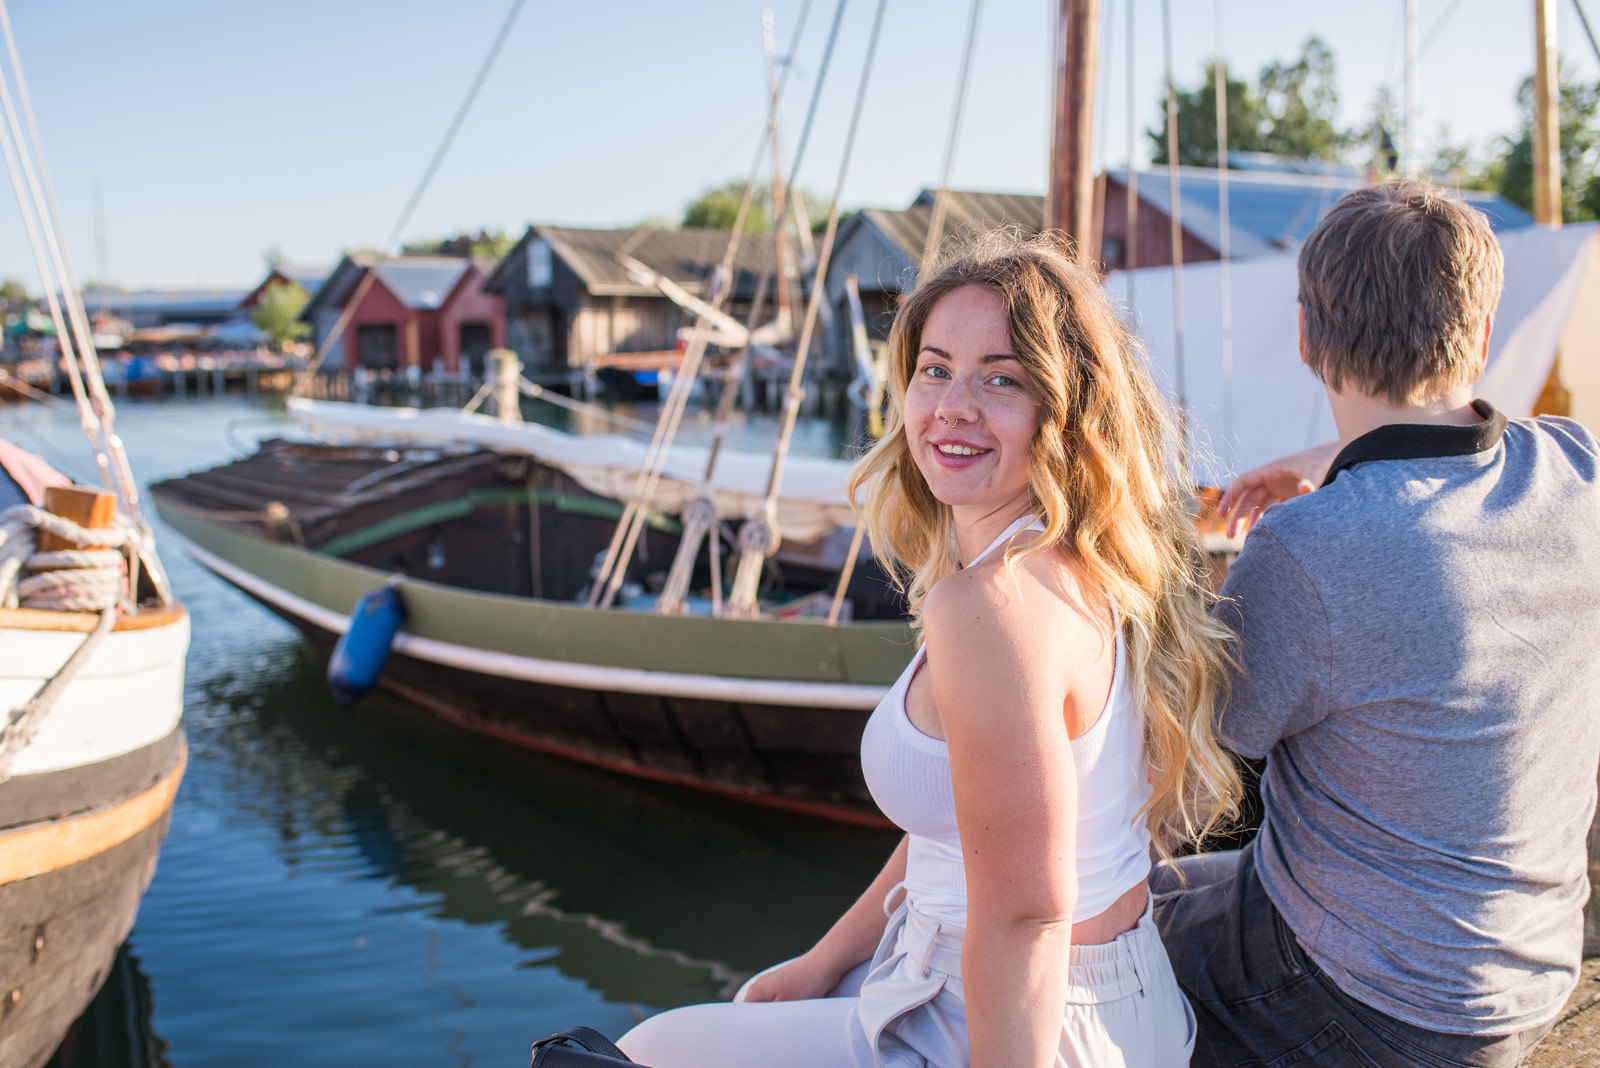 People enjoying their time in a Marina in the Åland archipelago